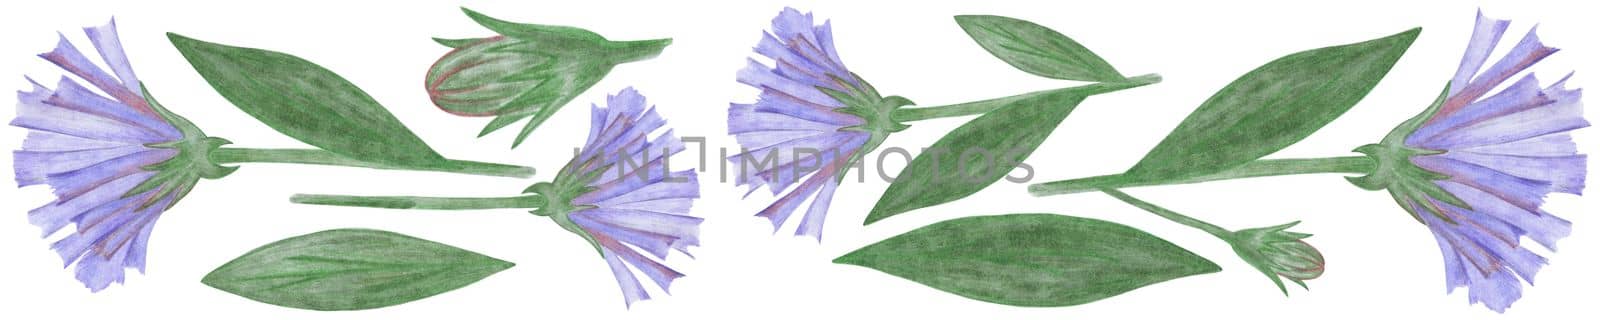 Set of Hand Drawn Blue Flower with Green Leaves Isolated on White Background. by Rina_Dozornaya